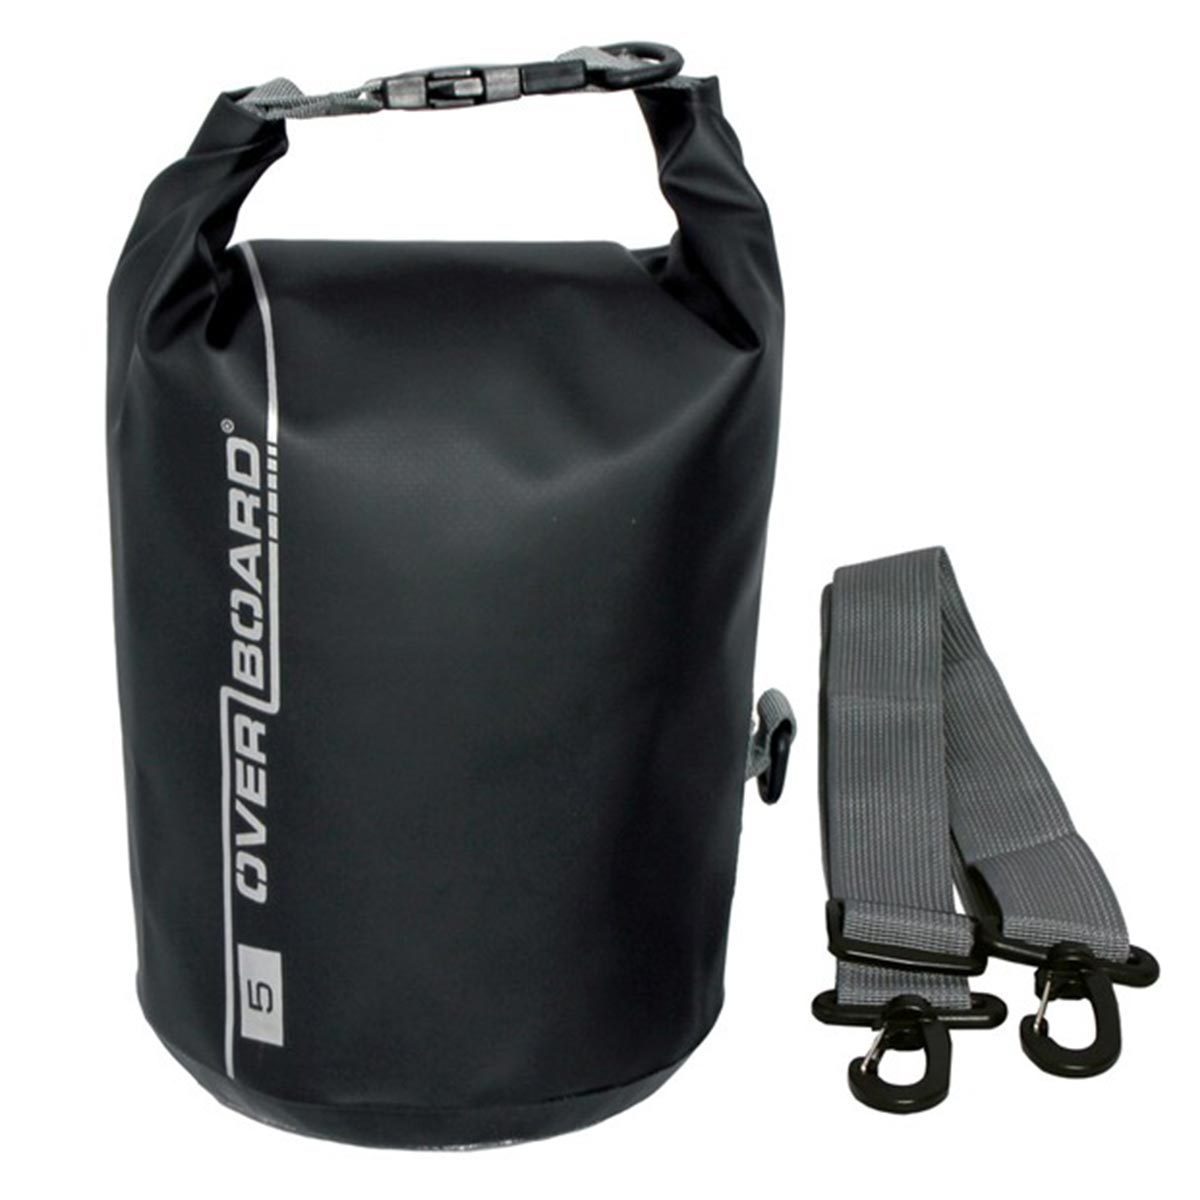 Overboard 5 Litre Dry Tube Bag Bags, Packs and Cases Overboard Black Tactical Gear Supplier Tactical Distributors Australia